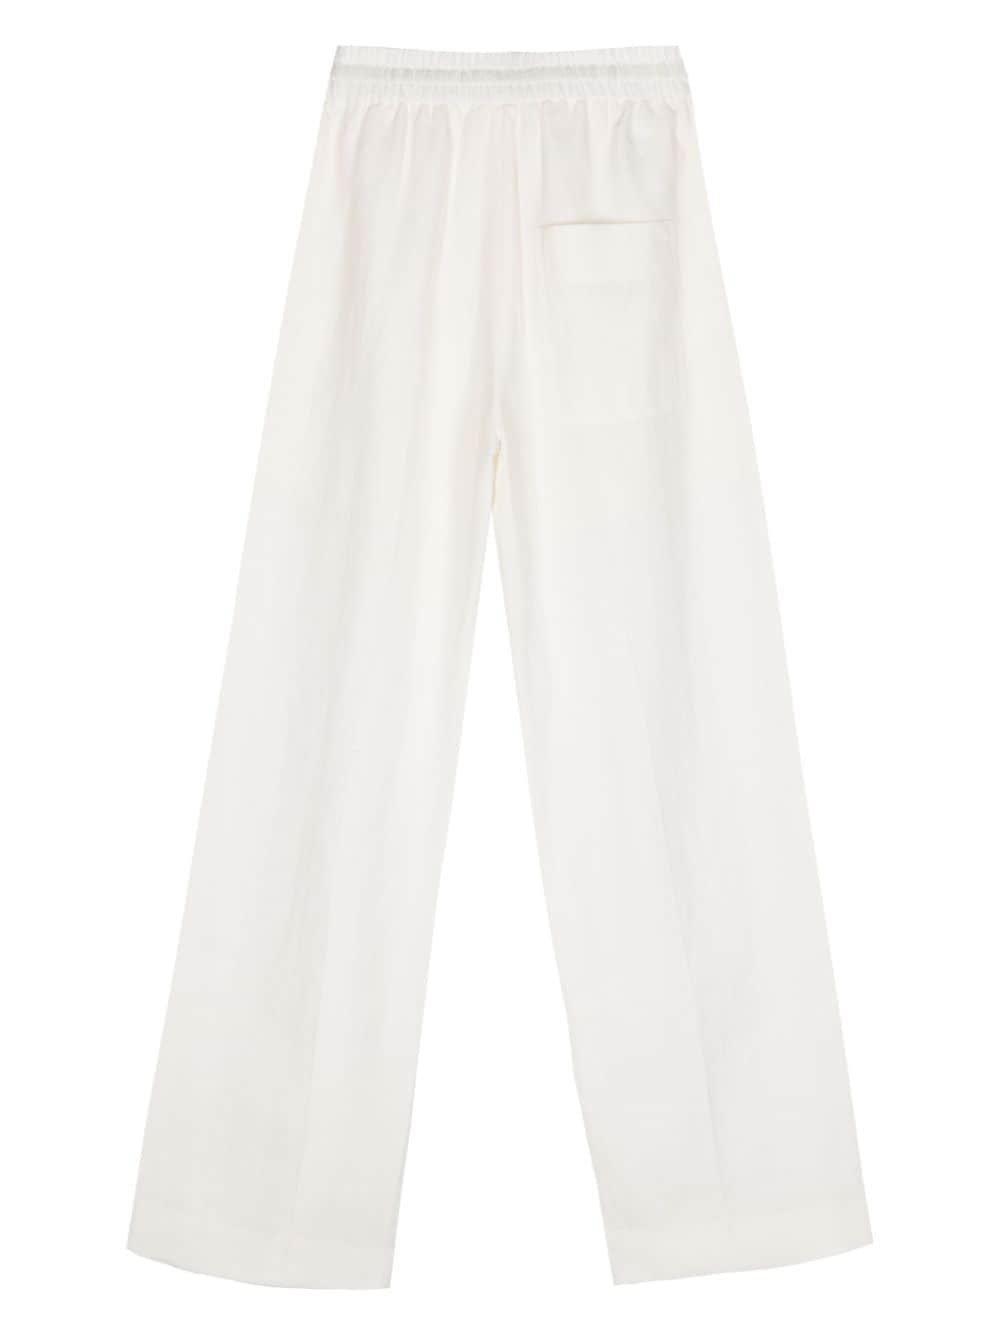 Paul Smith Trousers White